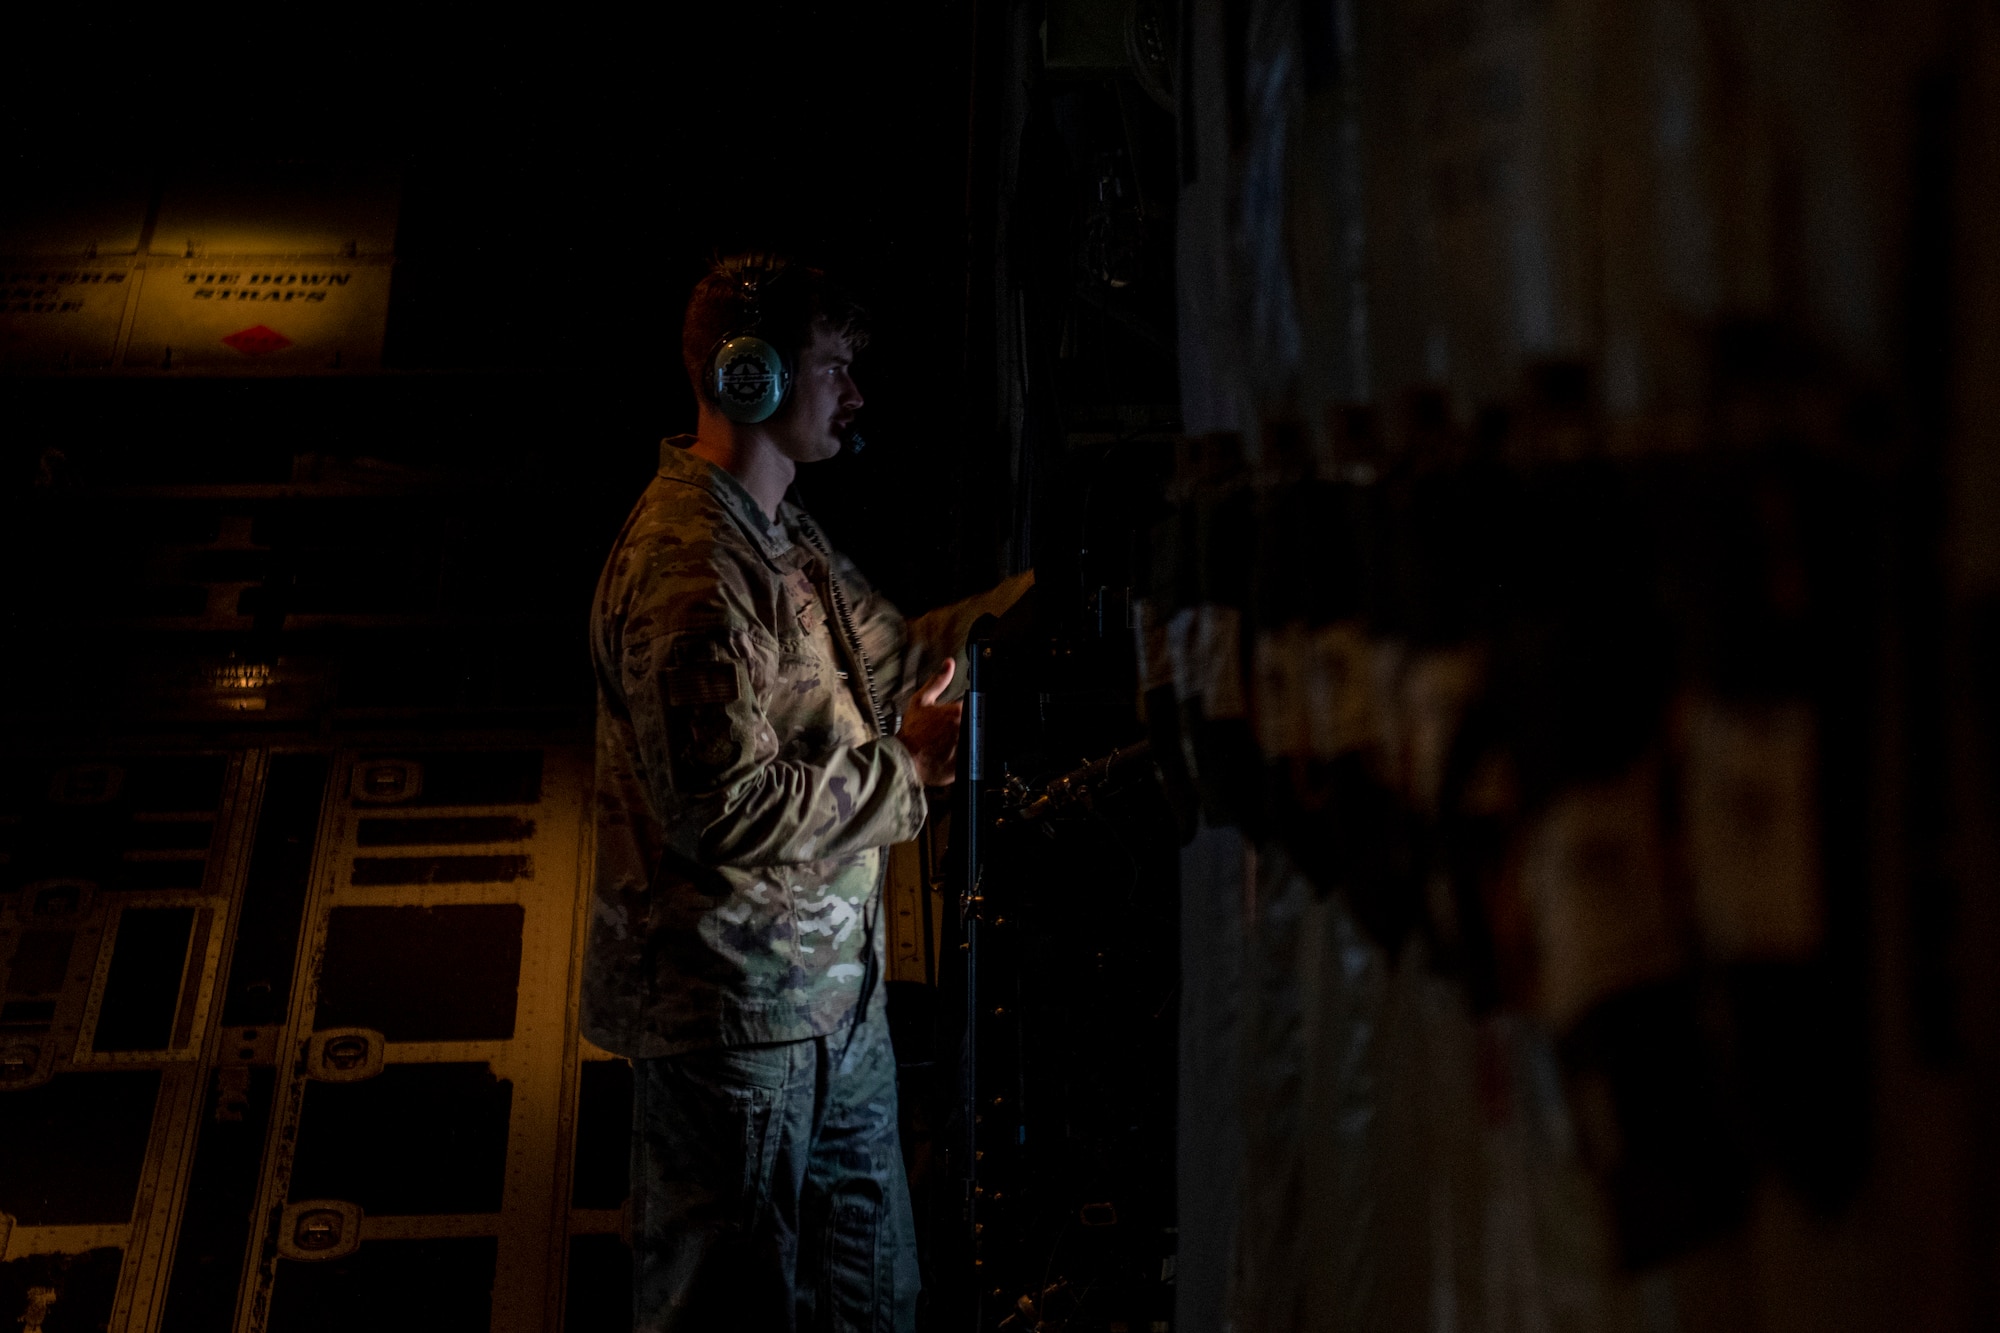 U.S. Air Force Tech. Sgt. John Richman, a 492nd Special Operations Training Group Detachment 2 loadmaster, scans the airfield in a modified EC-130J Commando Solo during Operation Blood Rain near Eglin Range, Florida, Aug. 5, 2021.